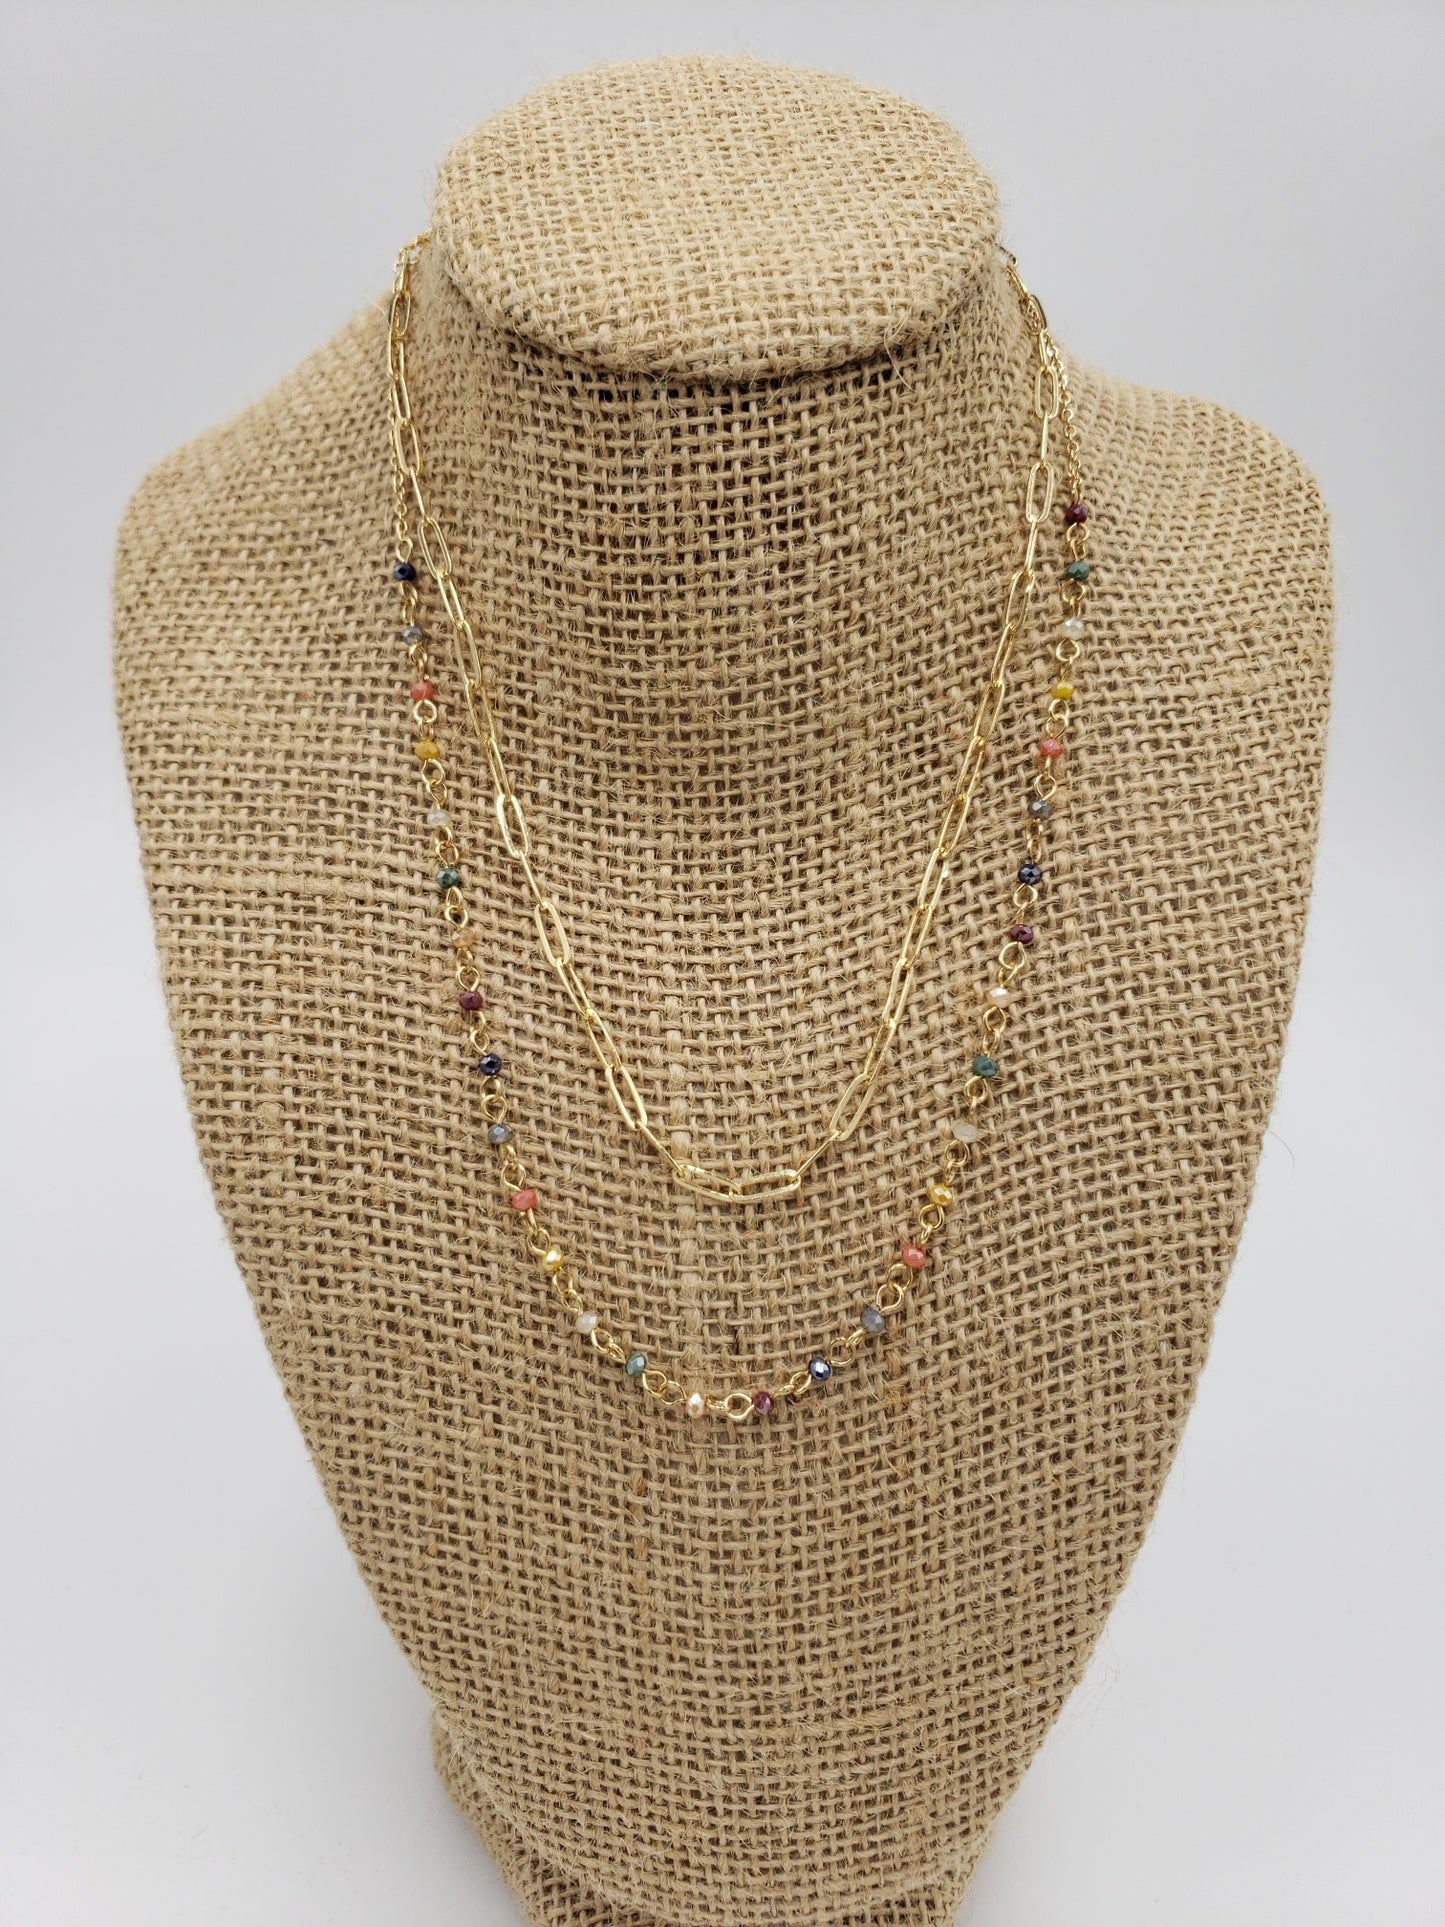 Multi color bead and chain necklace